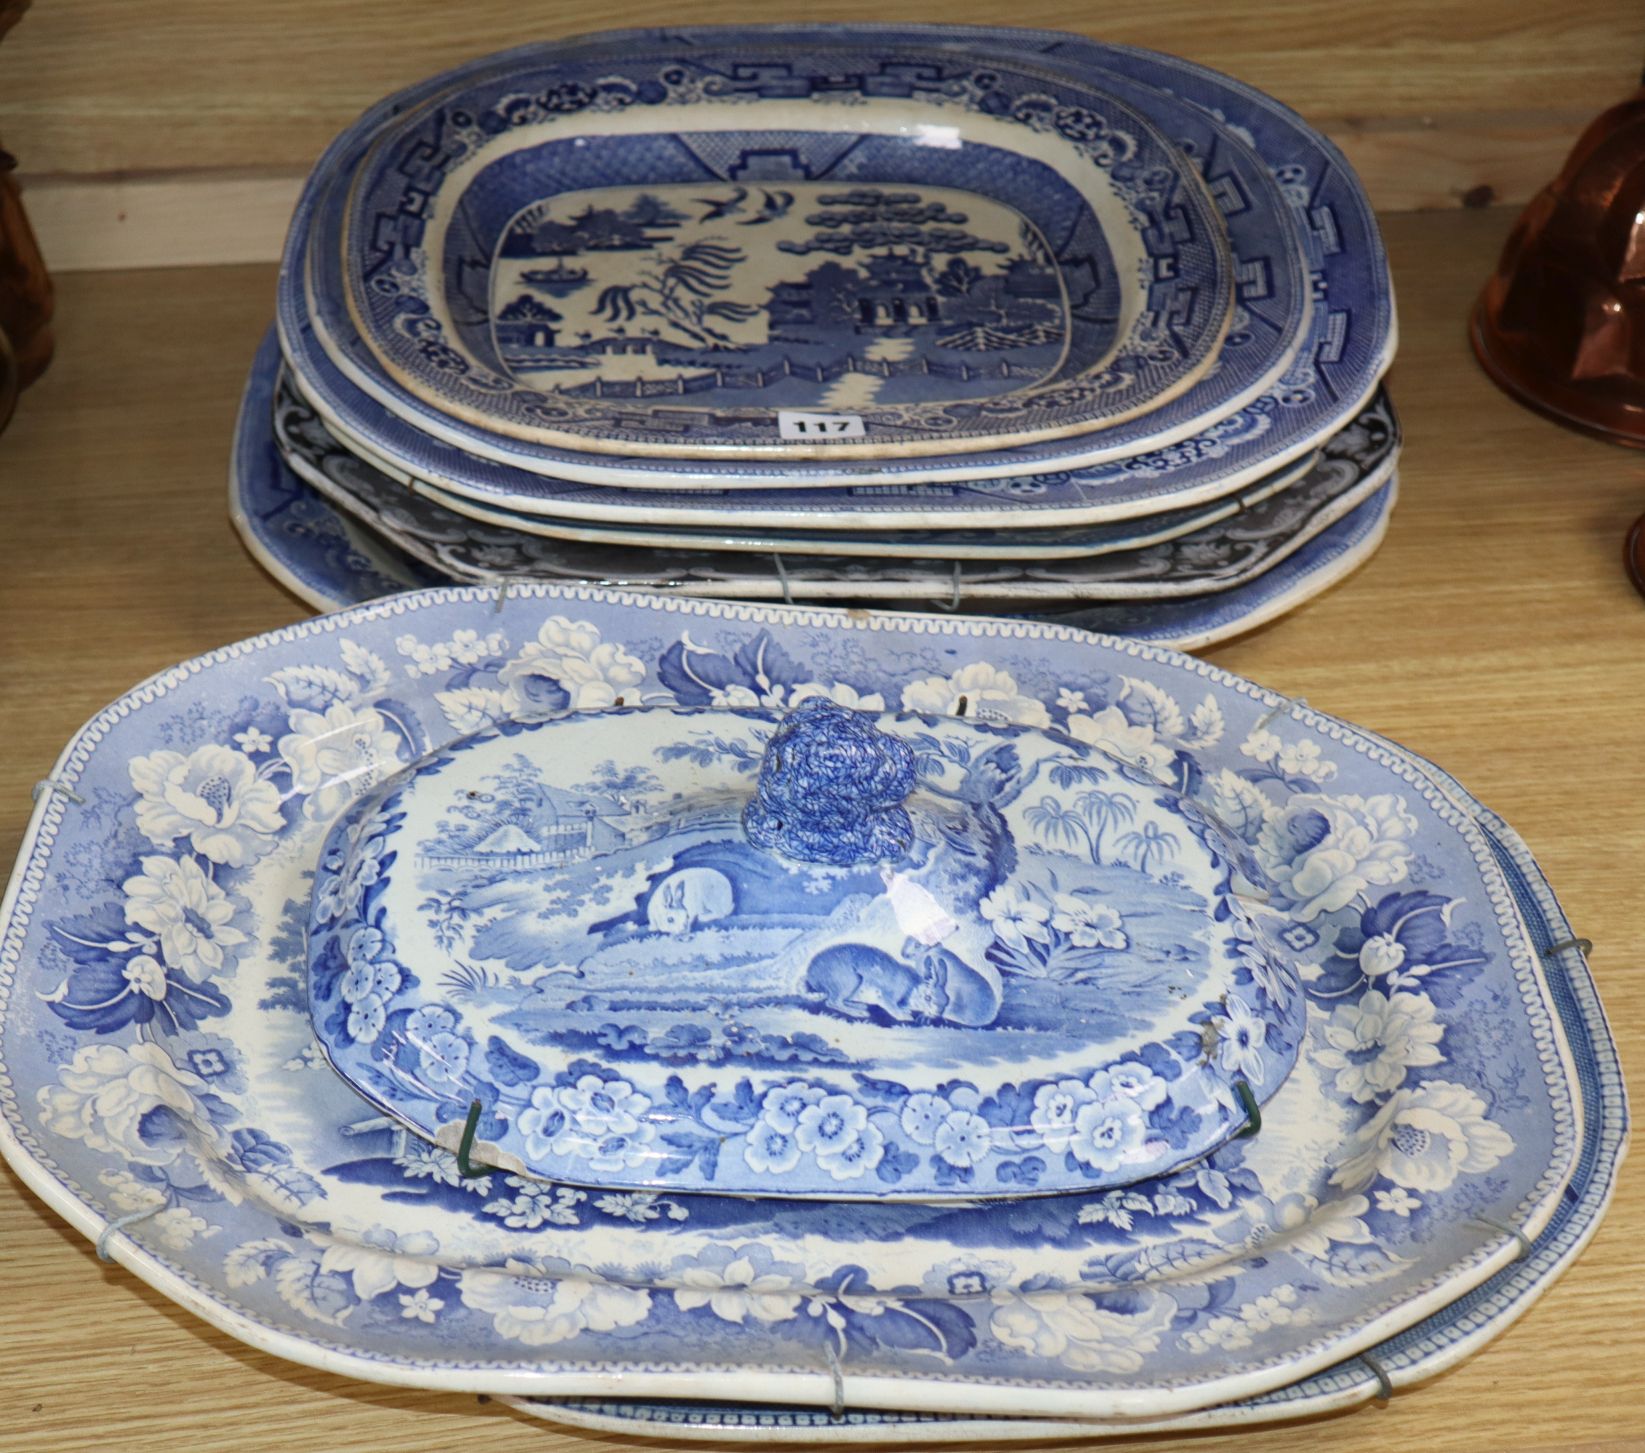 A collection of blue and white meat platters and a cover